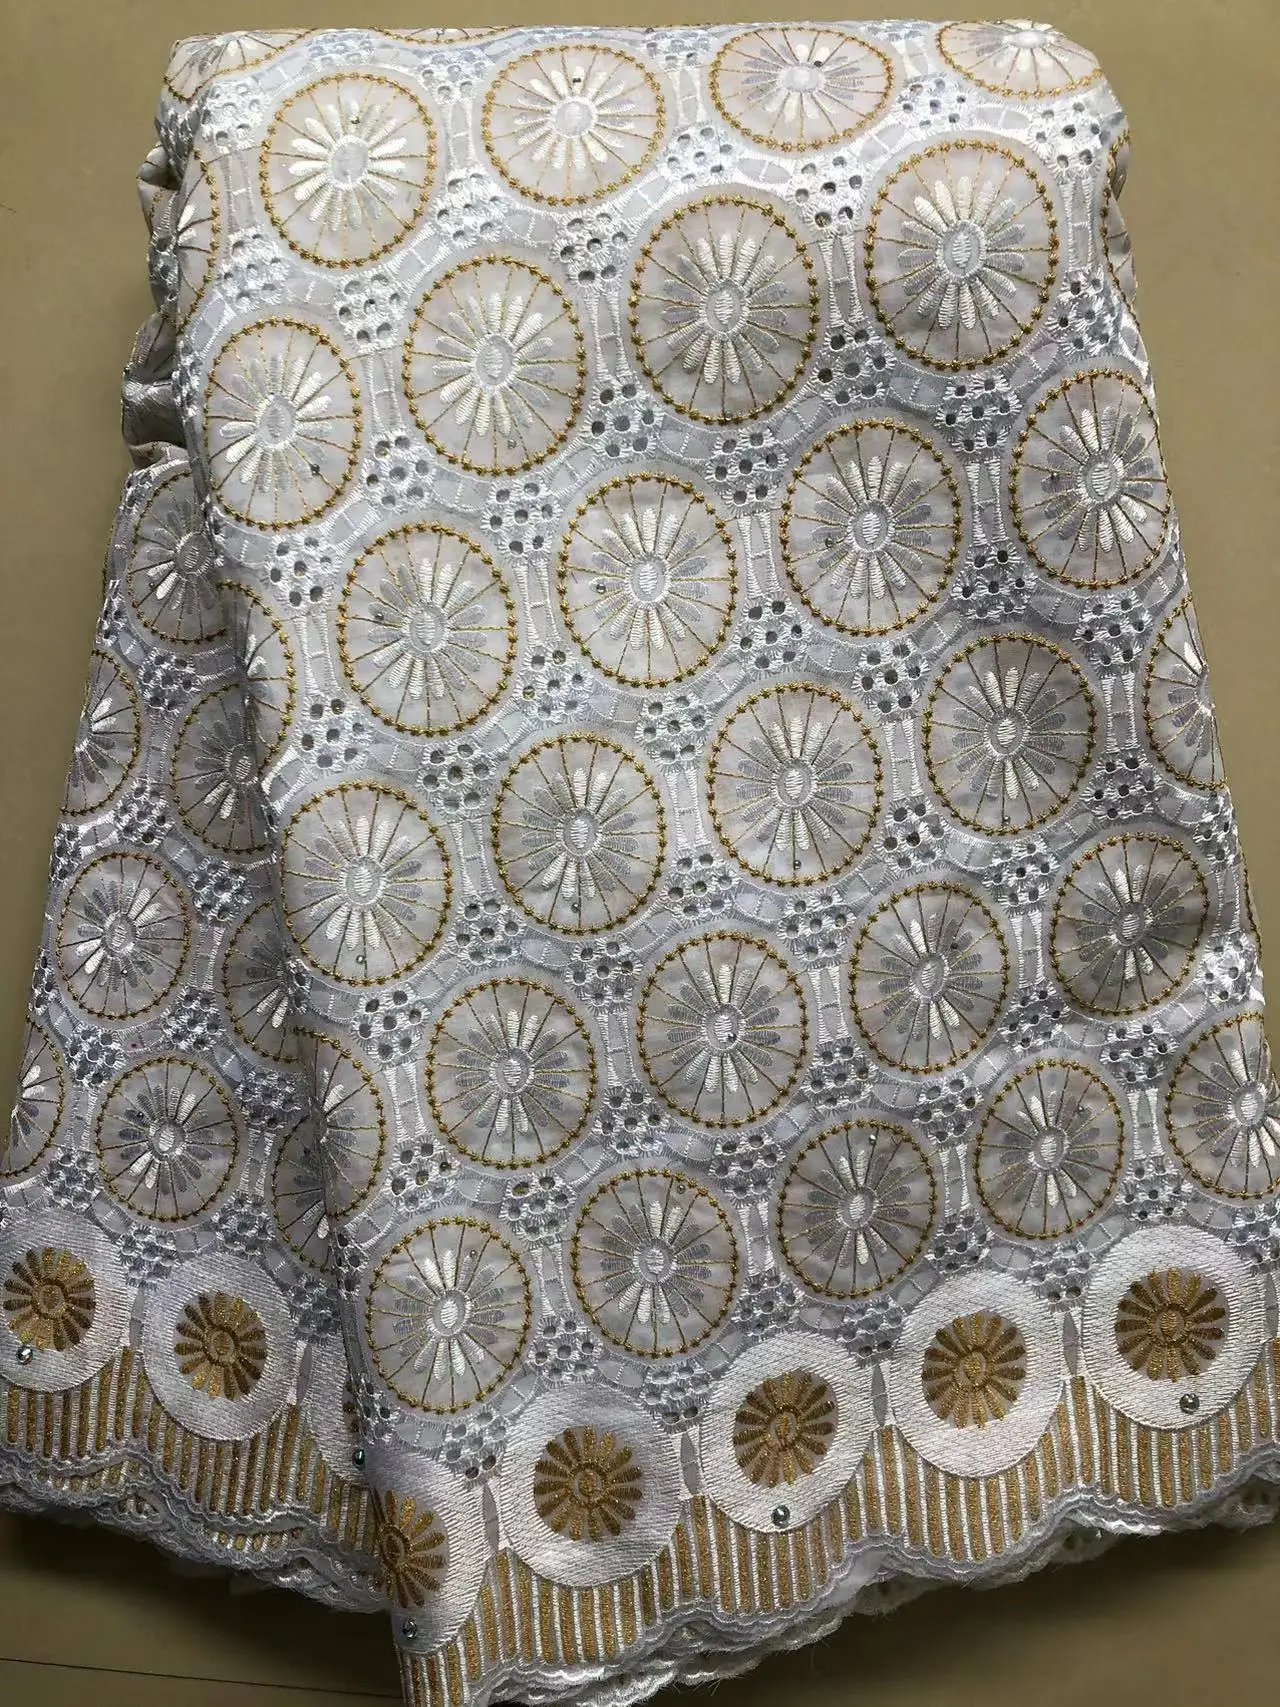 African Cotton Lace Fabric 2023 High Quality Swiss Voile Lace In Switzerland With Stones Nigerian Lace Fabrics For Wedding Dress white pure cotton design swiss voile lace in switzerland with stones african dry lace fabric high quality nigerian for wedding